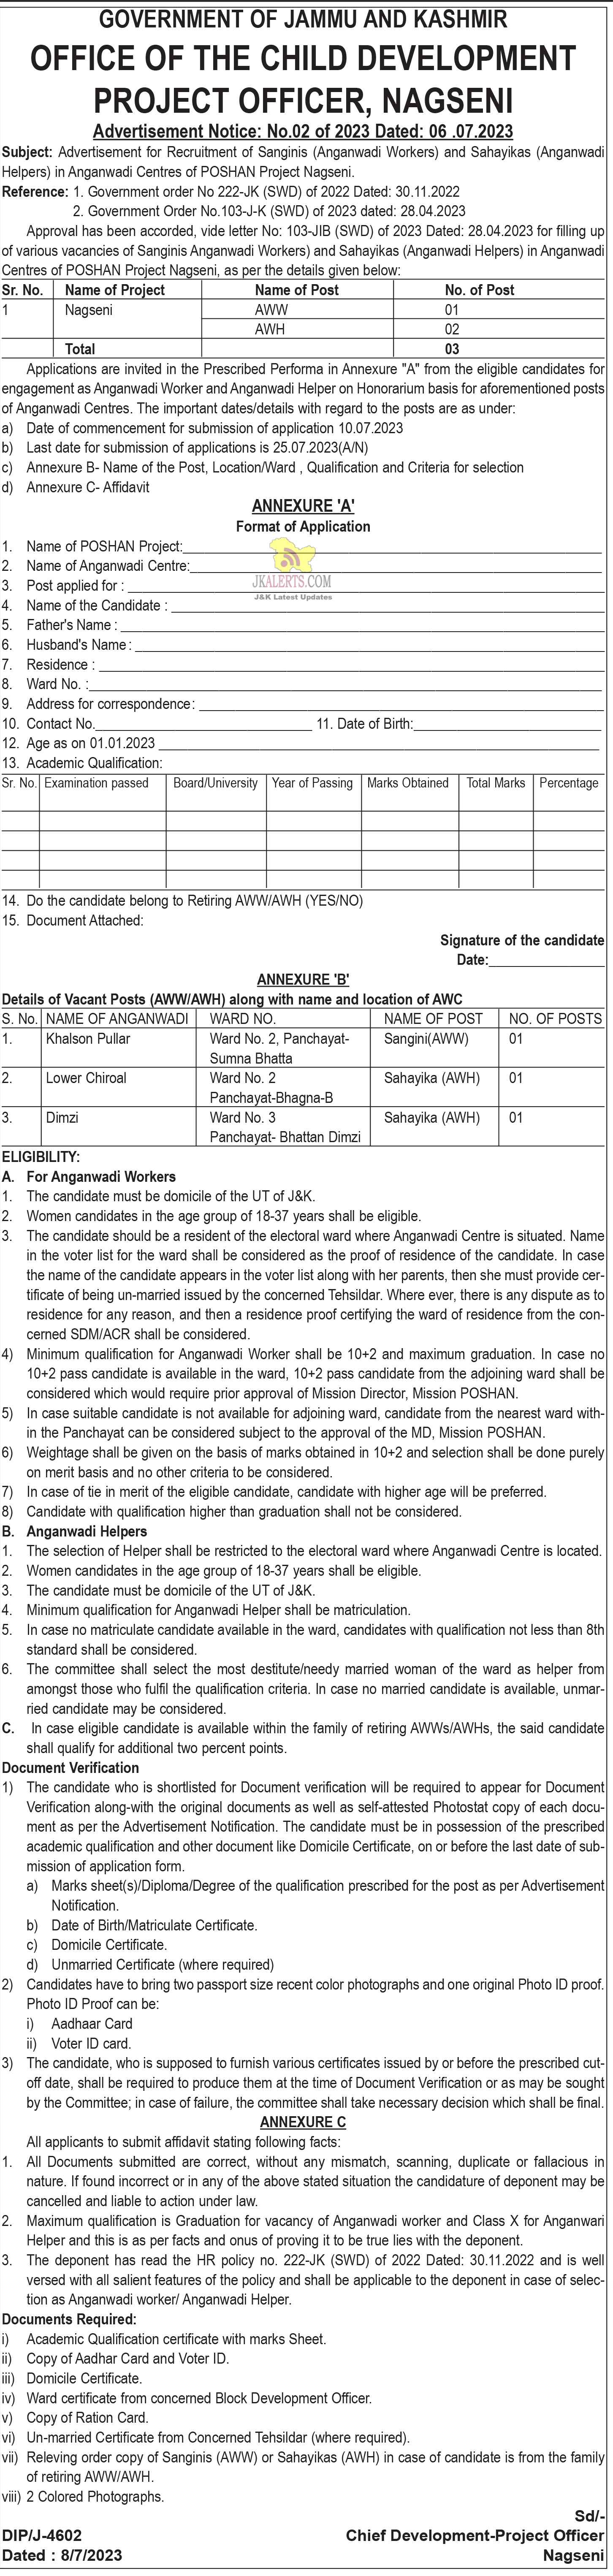 Anganwadi Workers and Helpers Jobs 2023.